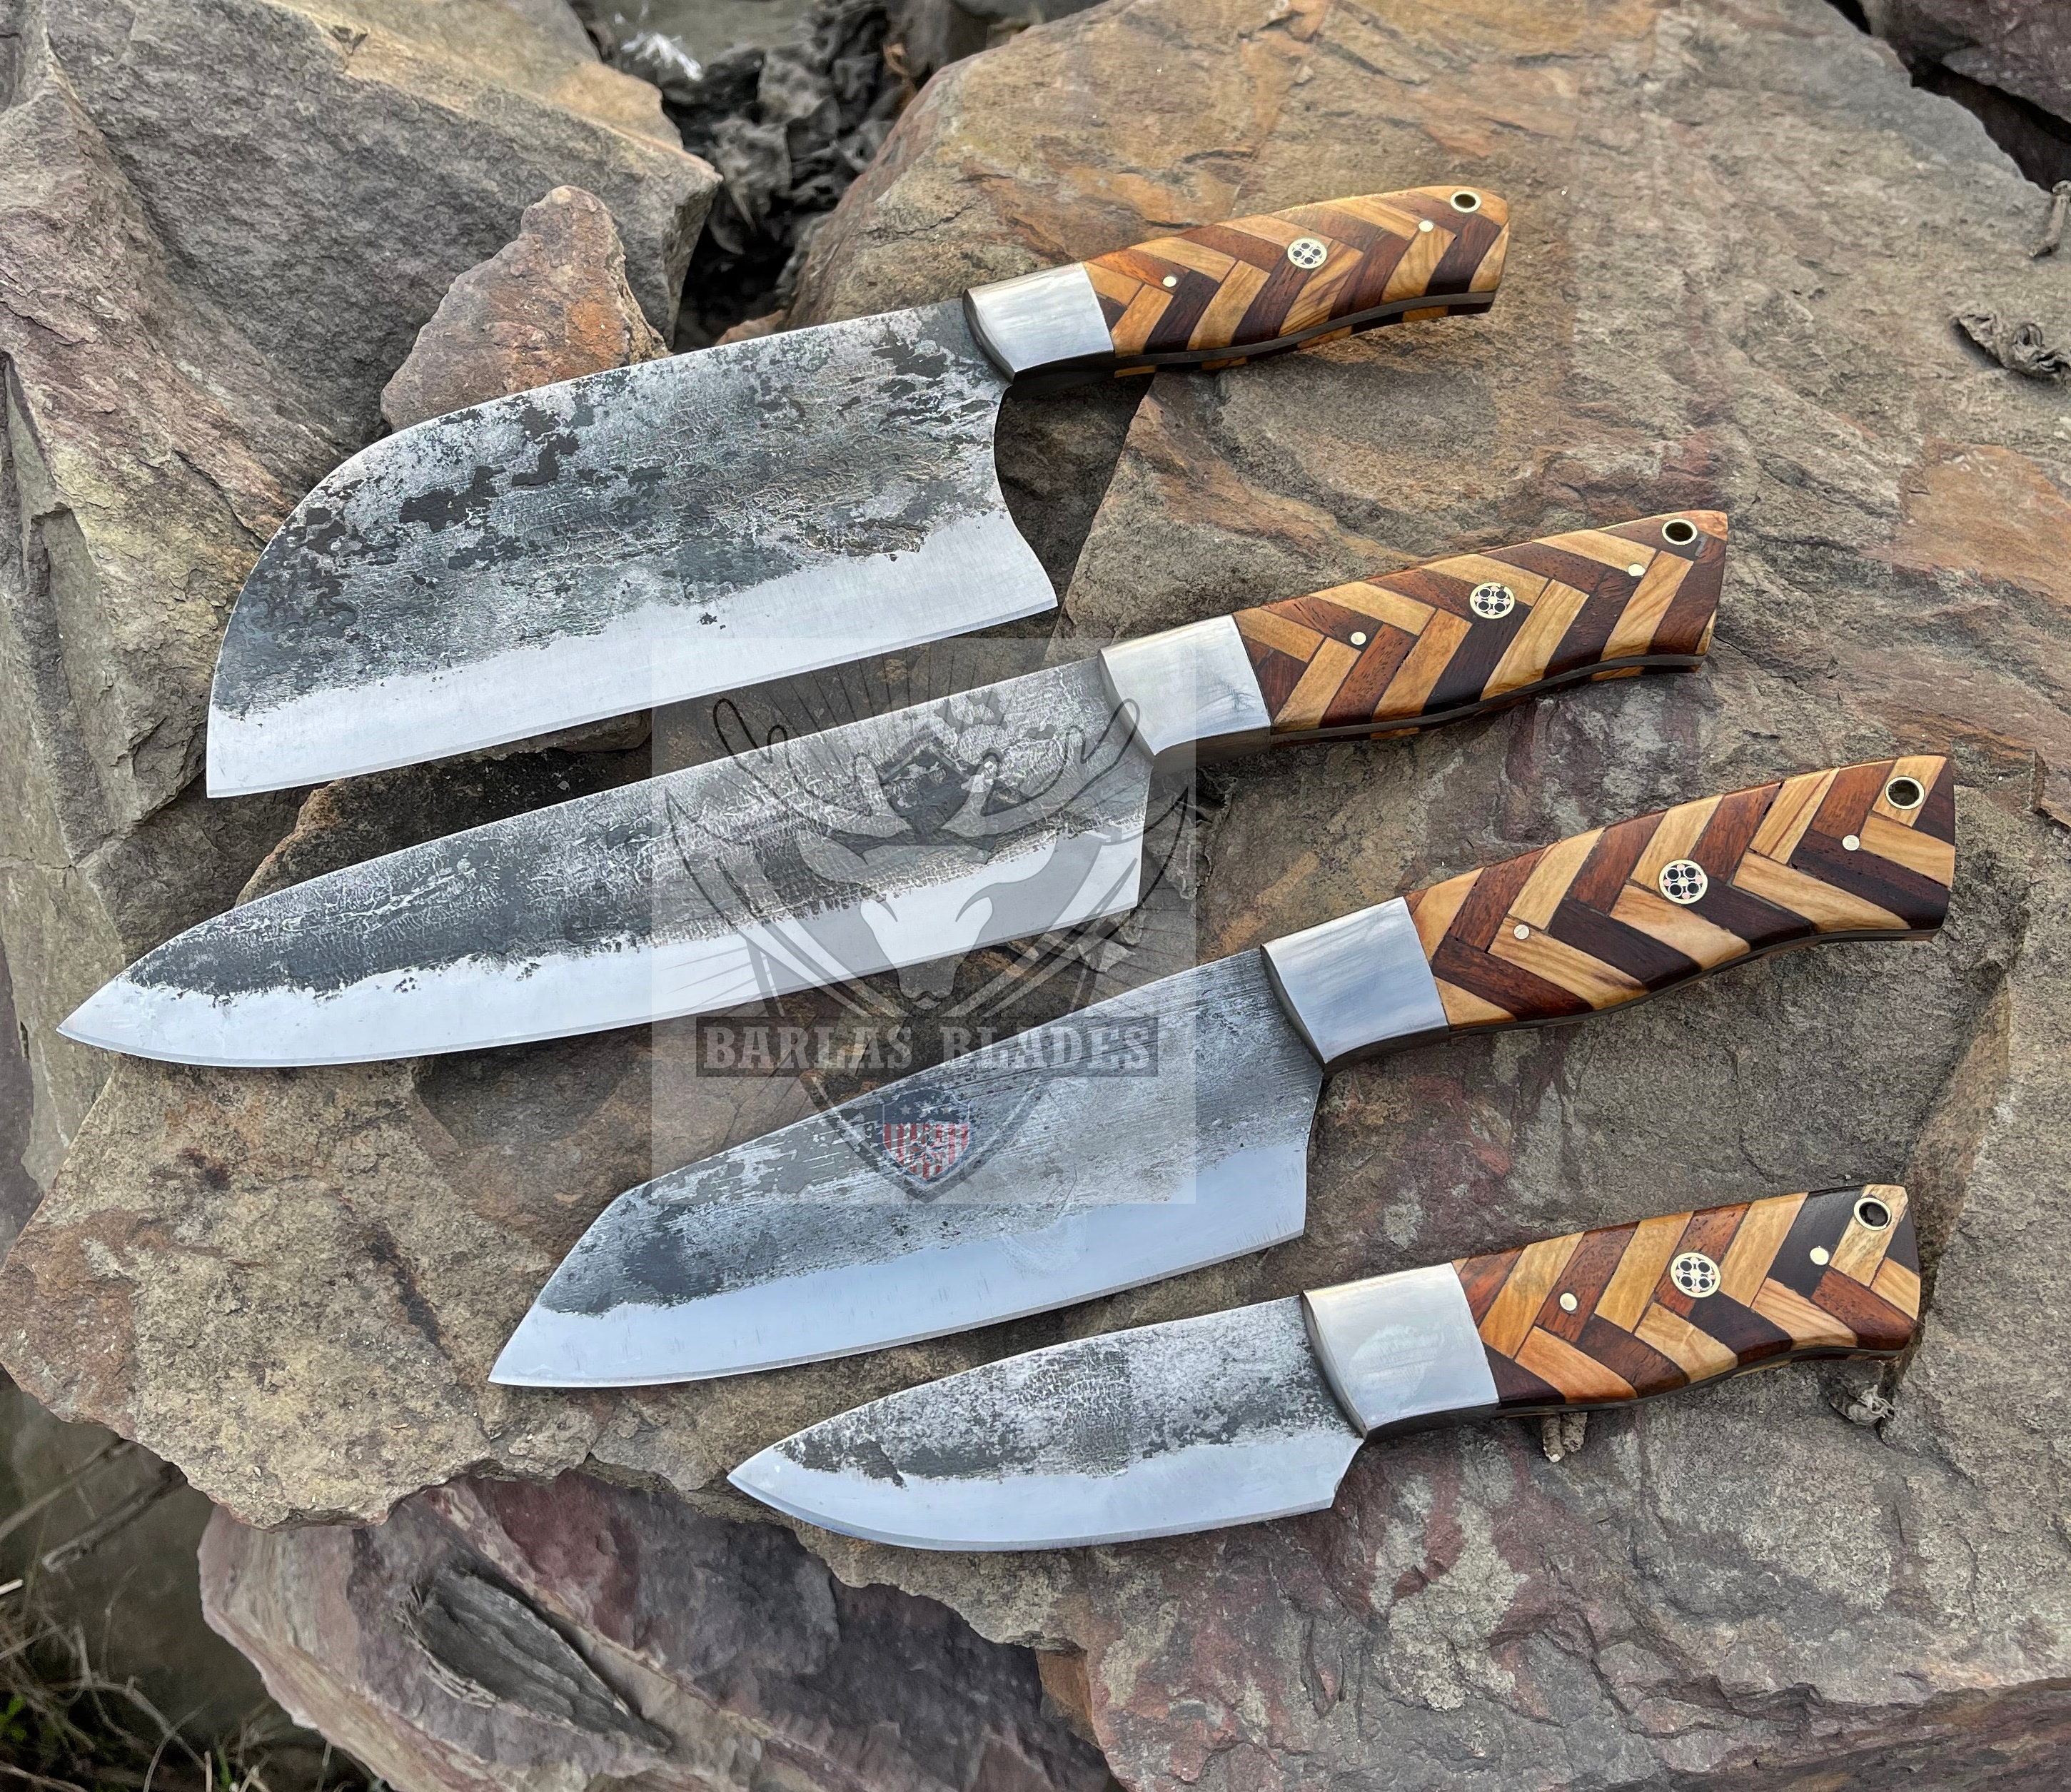 Hand Forged CHEF'S KNIFE Set of 5 BBQ Knife Kitchen Knife Gift for Her,  Men's Gift, Gift, Outdoor Knife, Father gift, Gift for her.